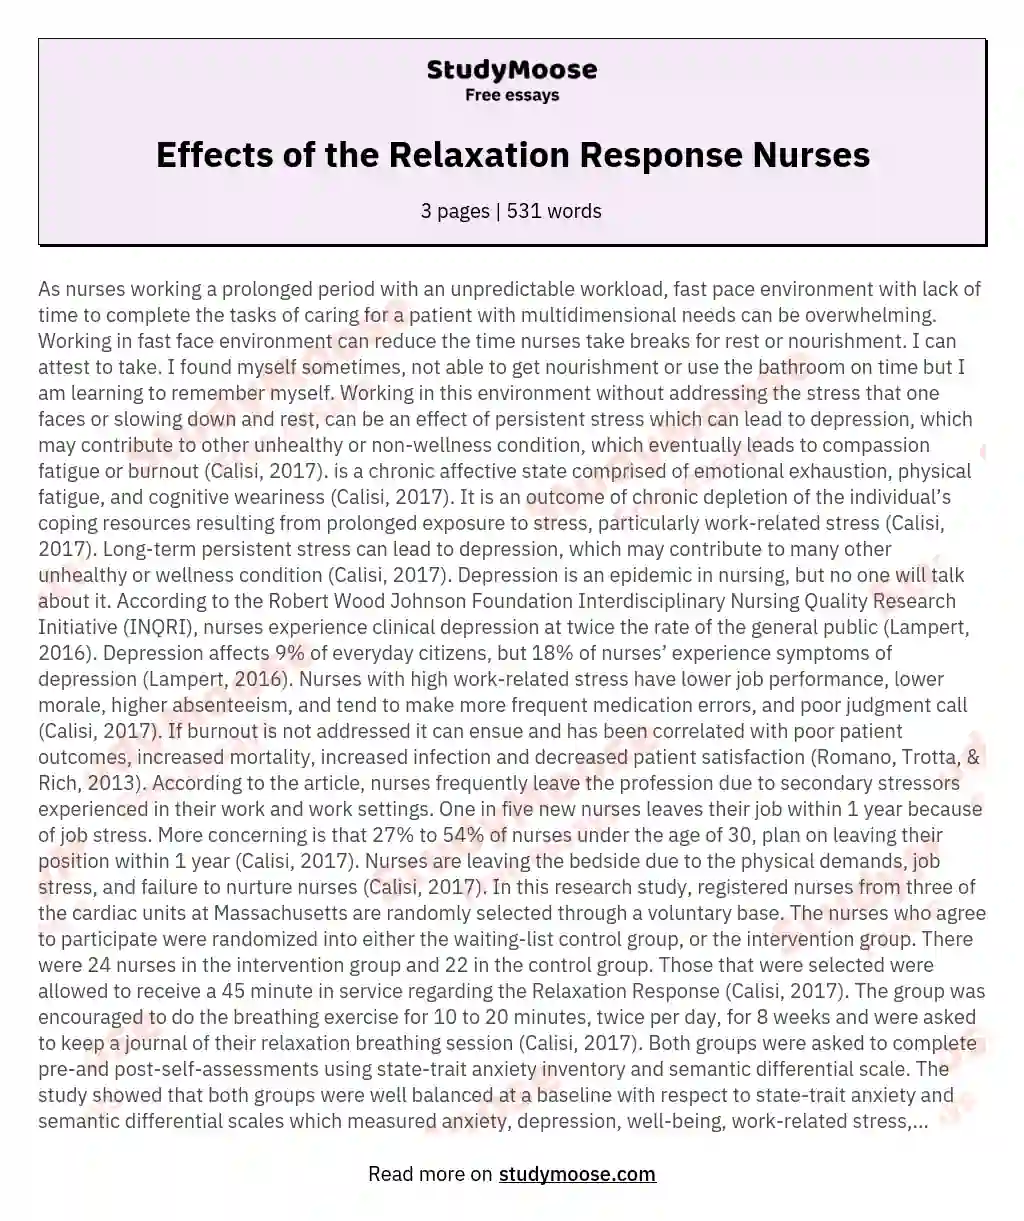 Effects of the Relaxation Response Nurses essay